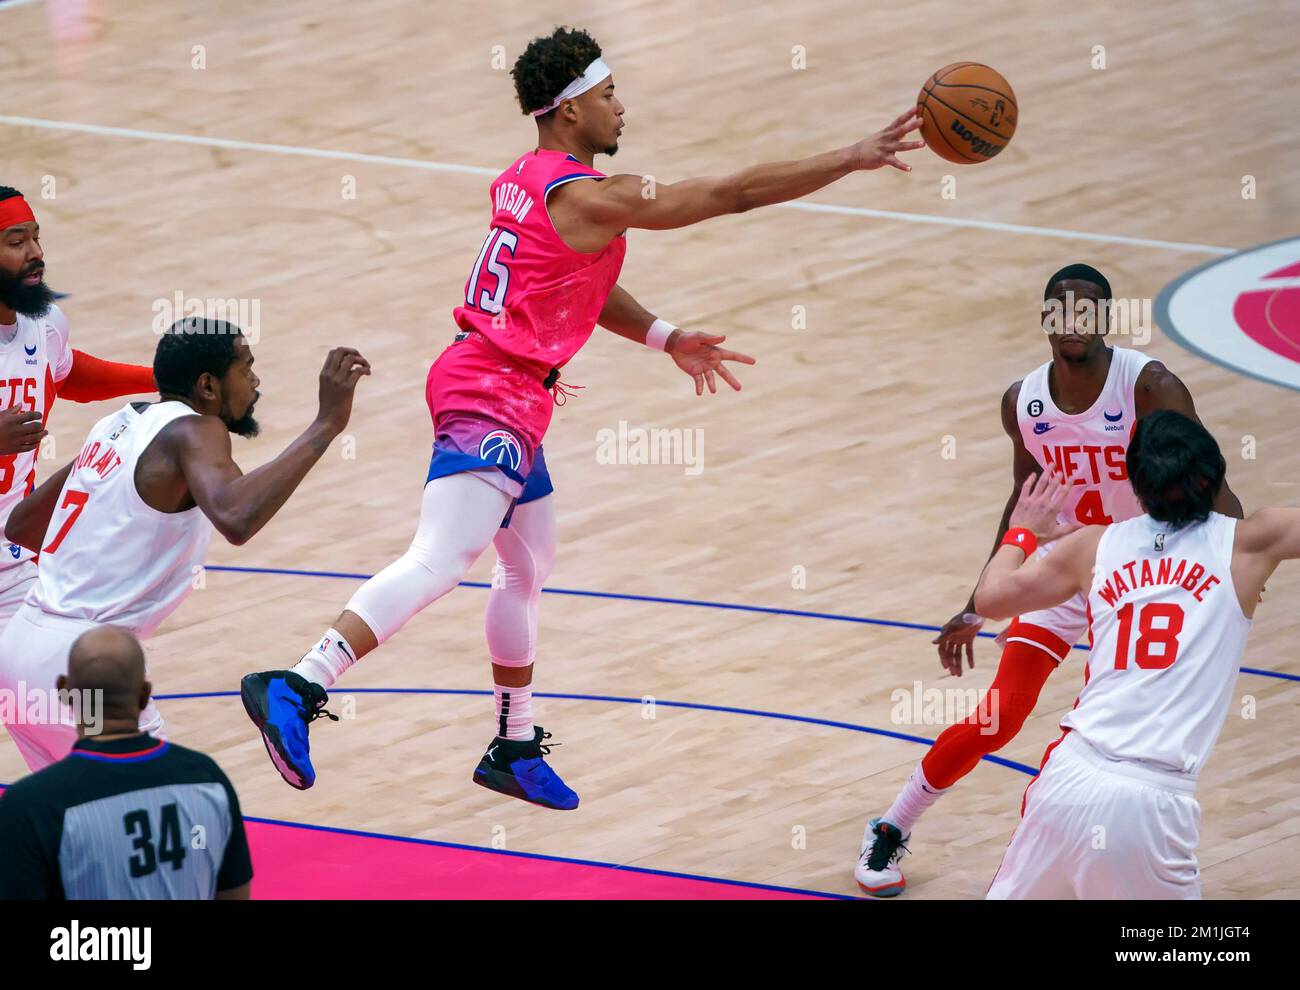 WASHINGTON, DC - DECEMBER 12: Washington Wizards guard Devon Dotson (15) throws out a pass during a NBA game between the Washington Wizards and the Brooklyn December 12 2022, at